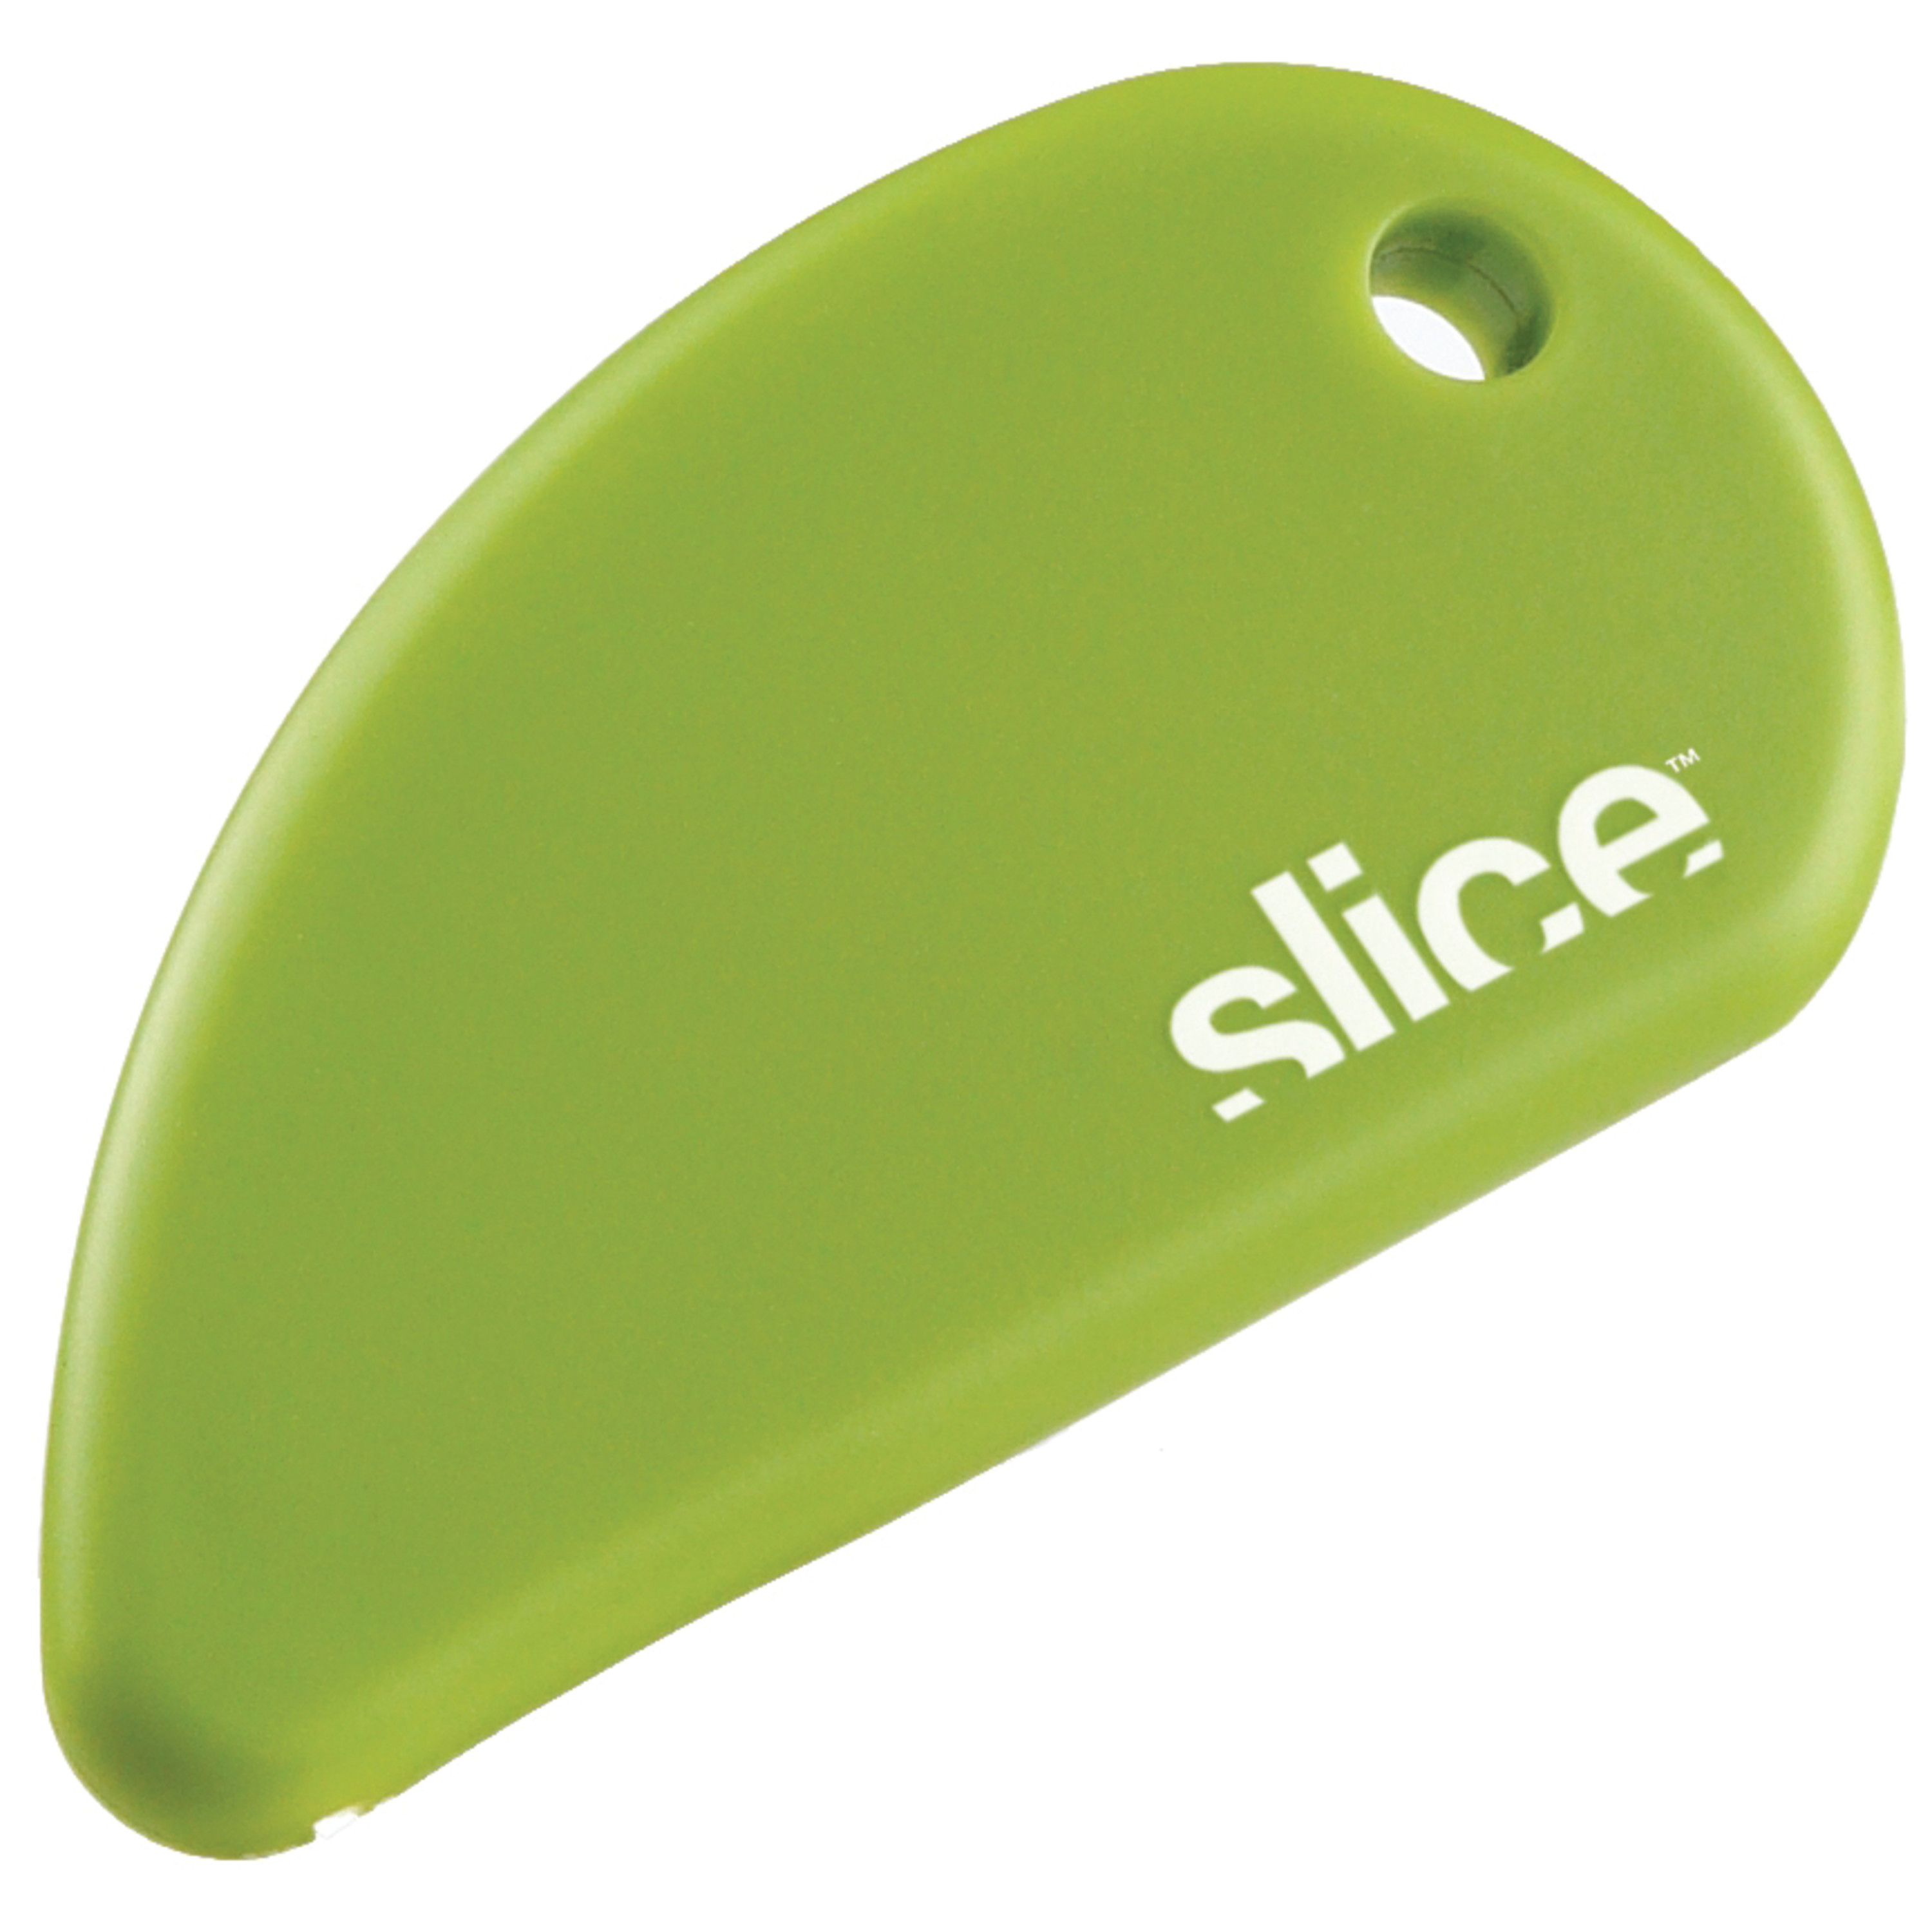 Slice Ceramic Safety Cutter, 2.25" x 1.25" - image 1 of 5